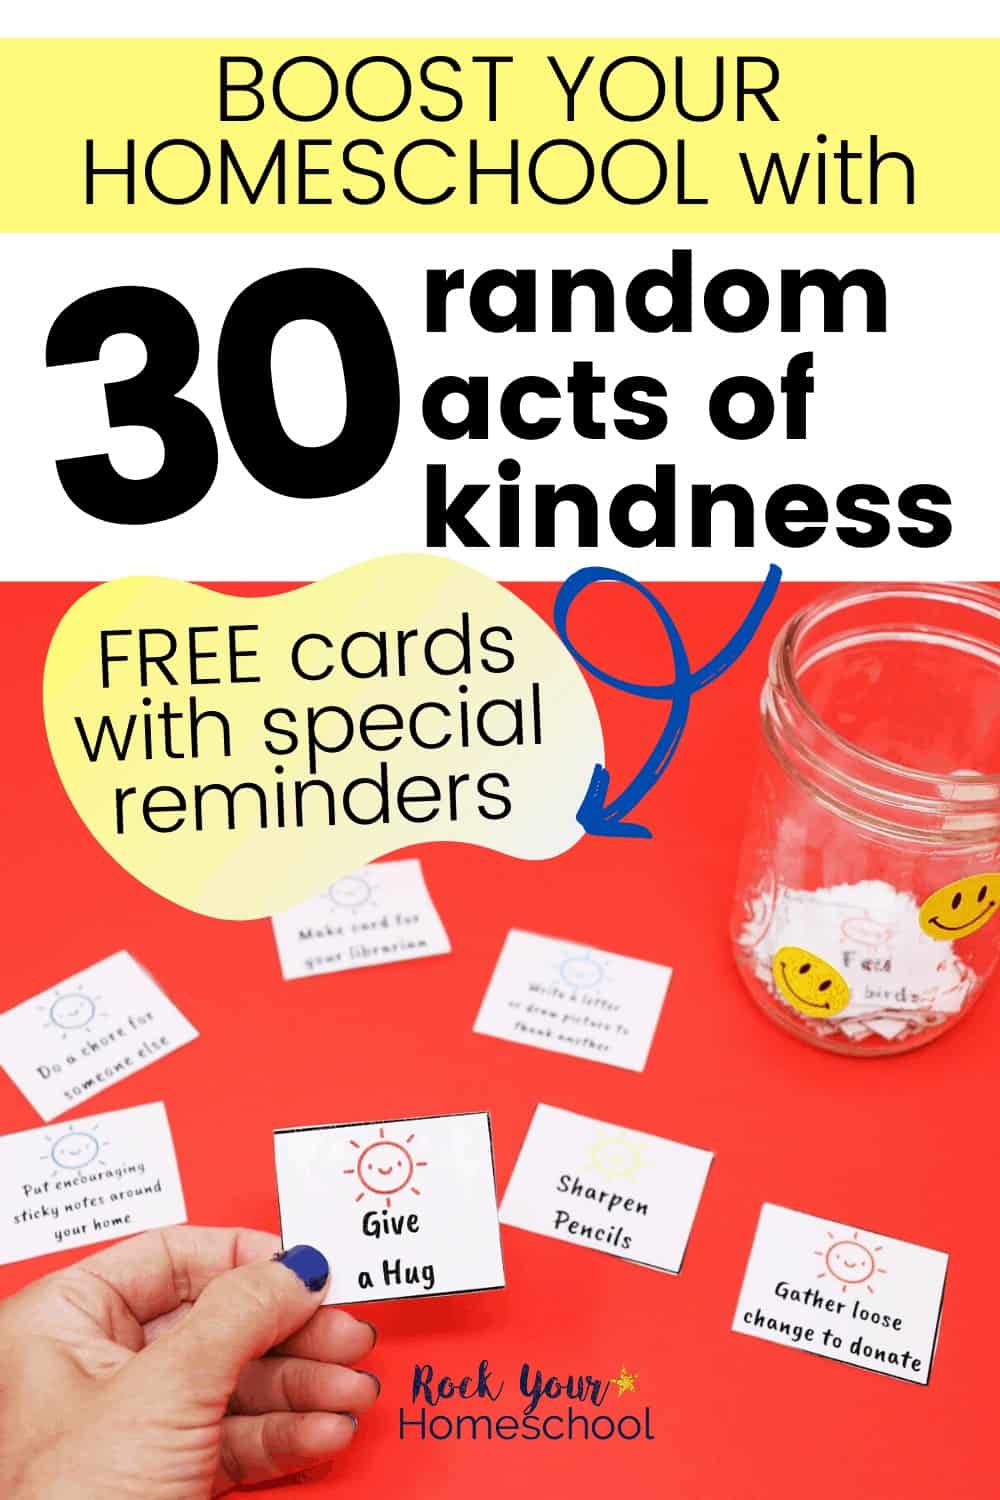 Free 30 Random Acts of Kindness to Boost Your Homeschool